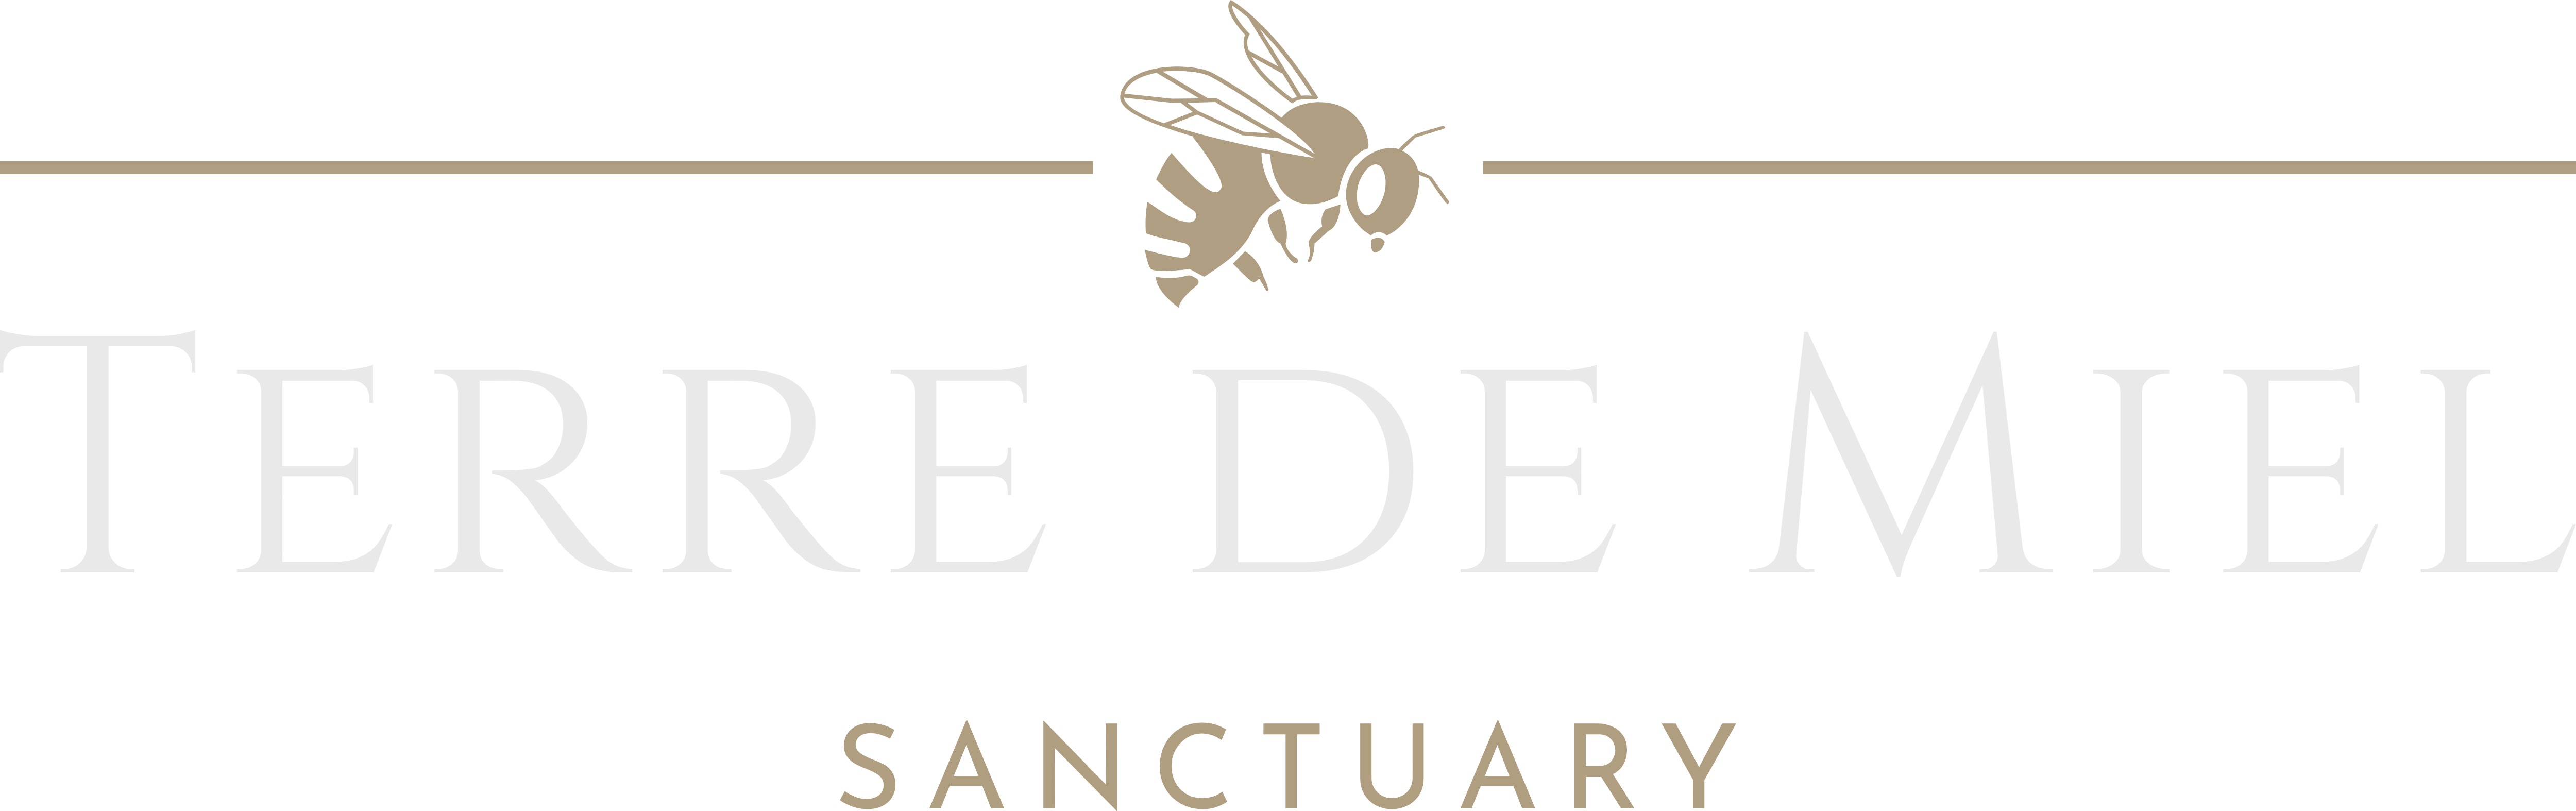 Terre de miel logo: in golden letters and a golden bee